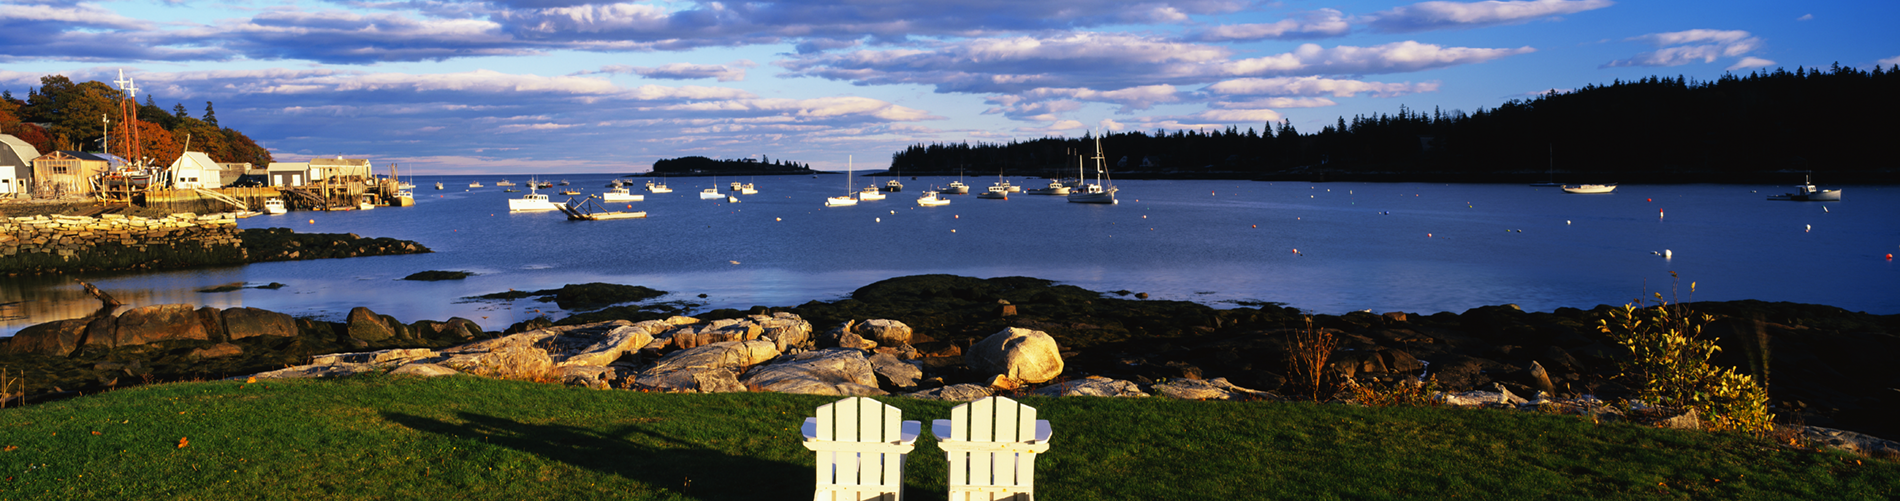 Lawn Chairs and Harbor at Lobster Village